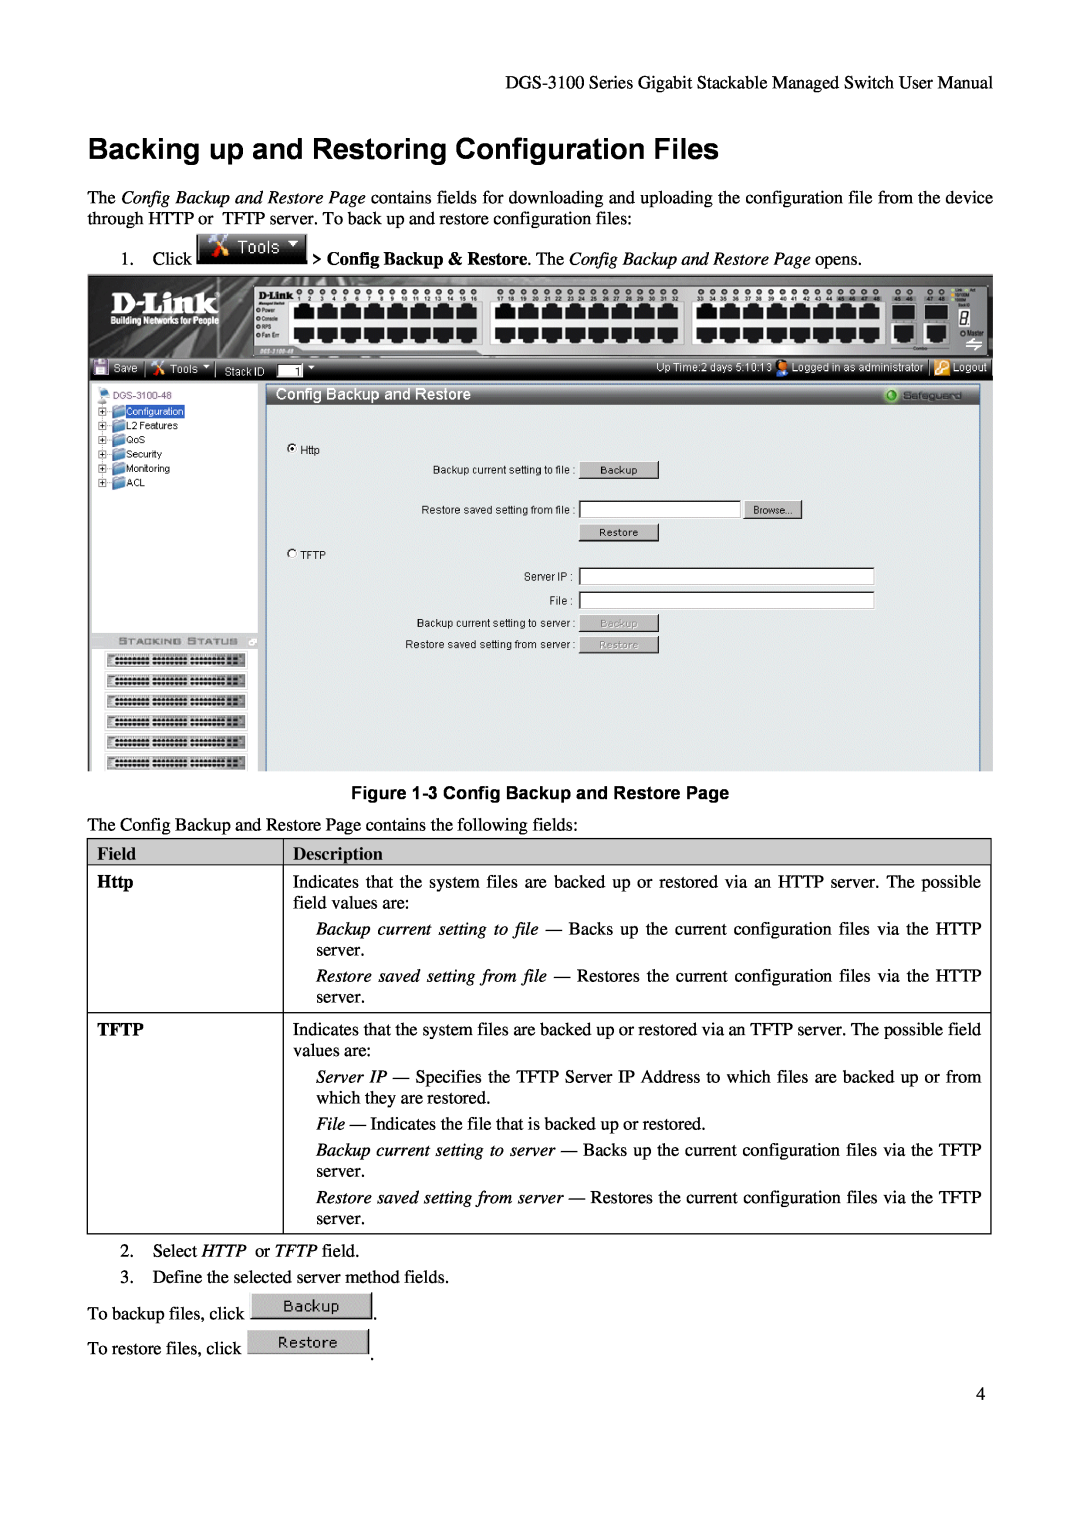 D-Link DGS-3100 user manual Backing up and Restoring Configuration Files, 3 Config Backup and Restore Page, Field Http TFTP 